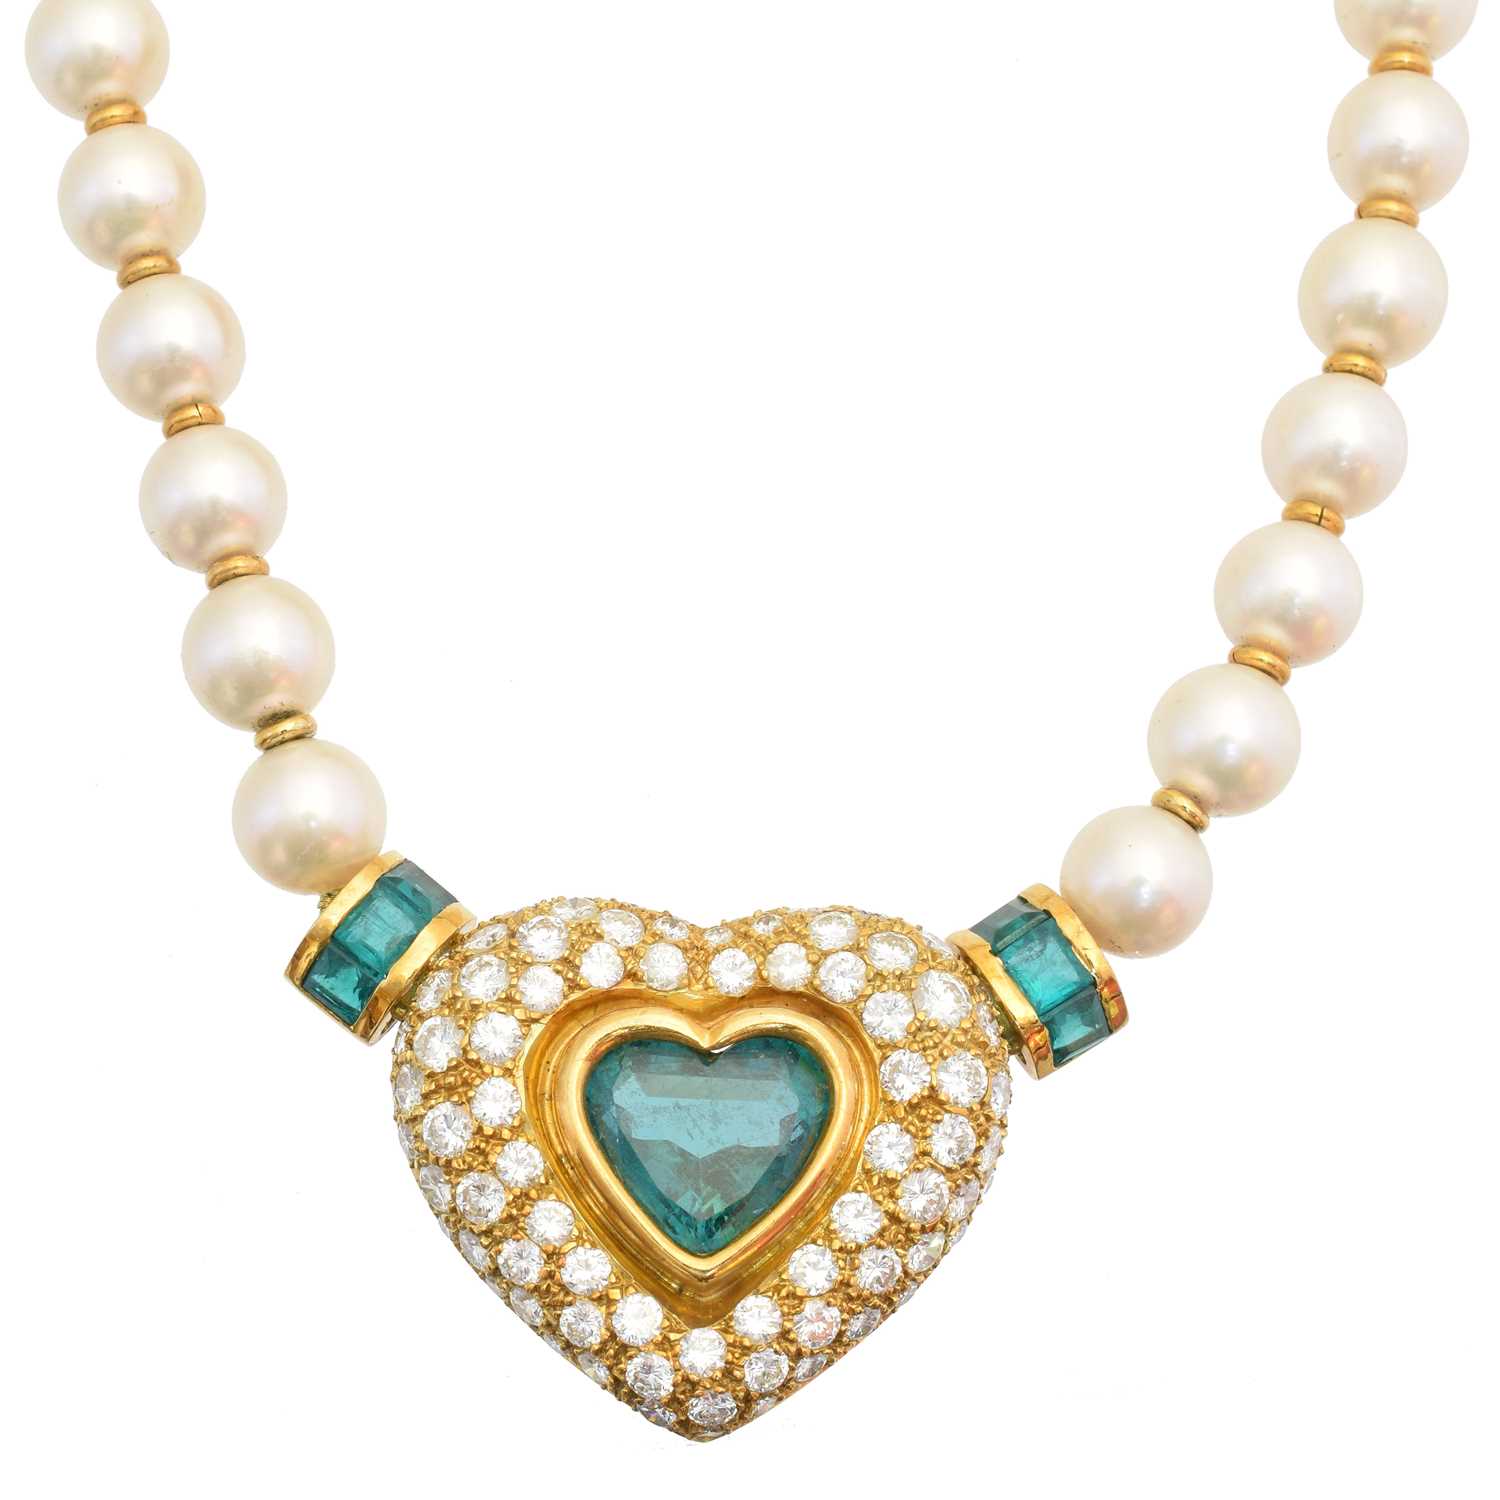 Lot 115 - An emerald, diamond and cultured pearl necklace